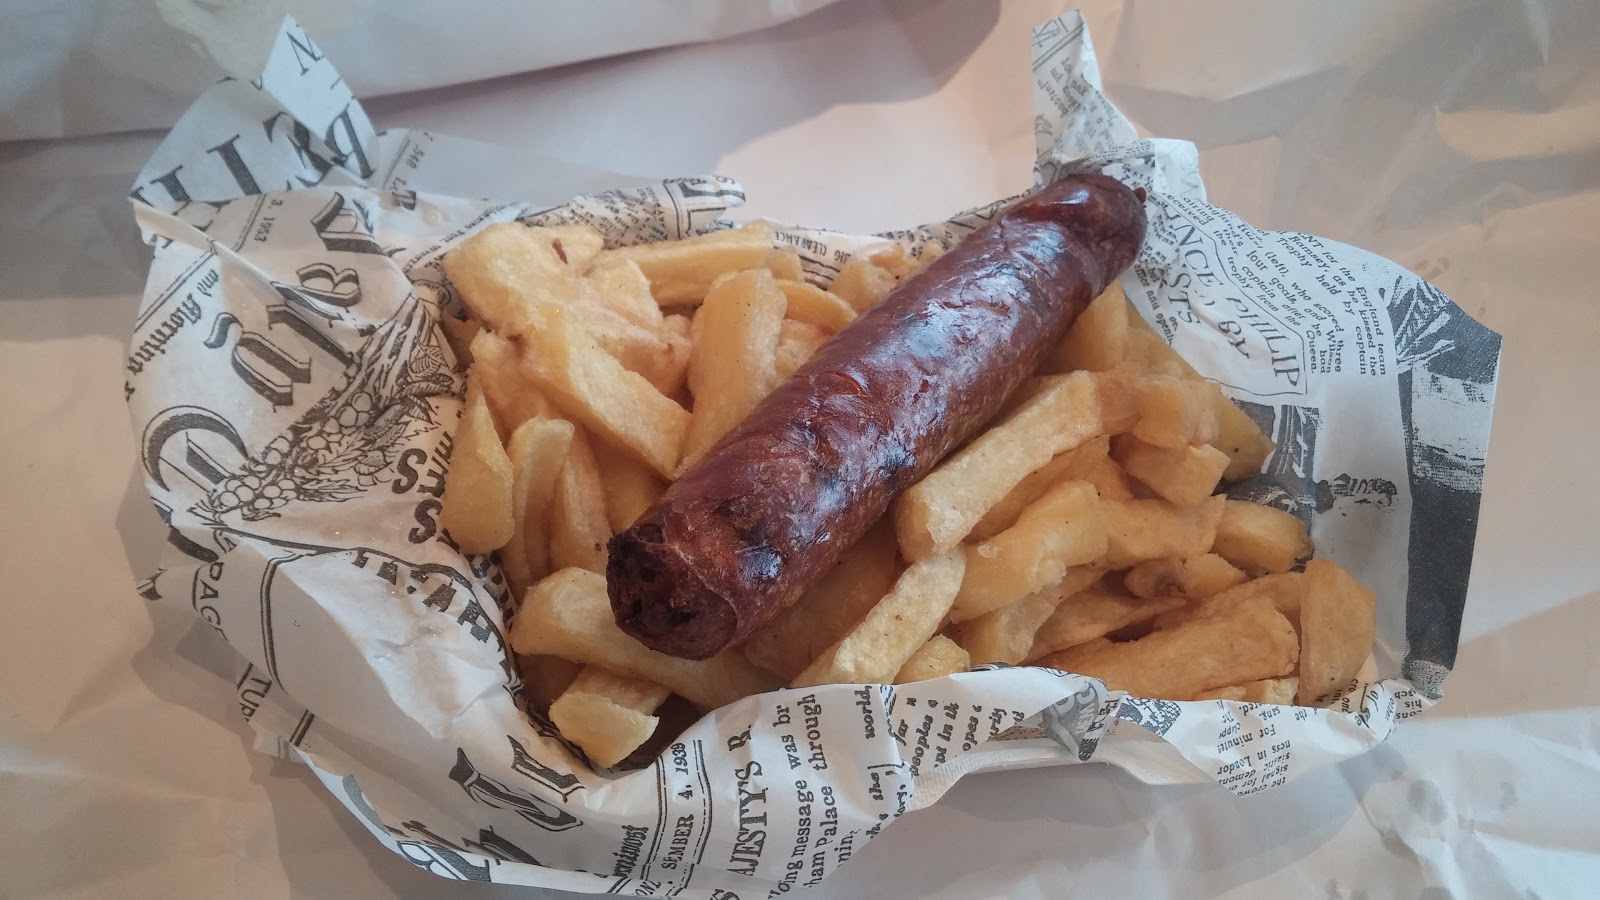 chilli sausage and chips